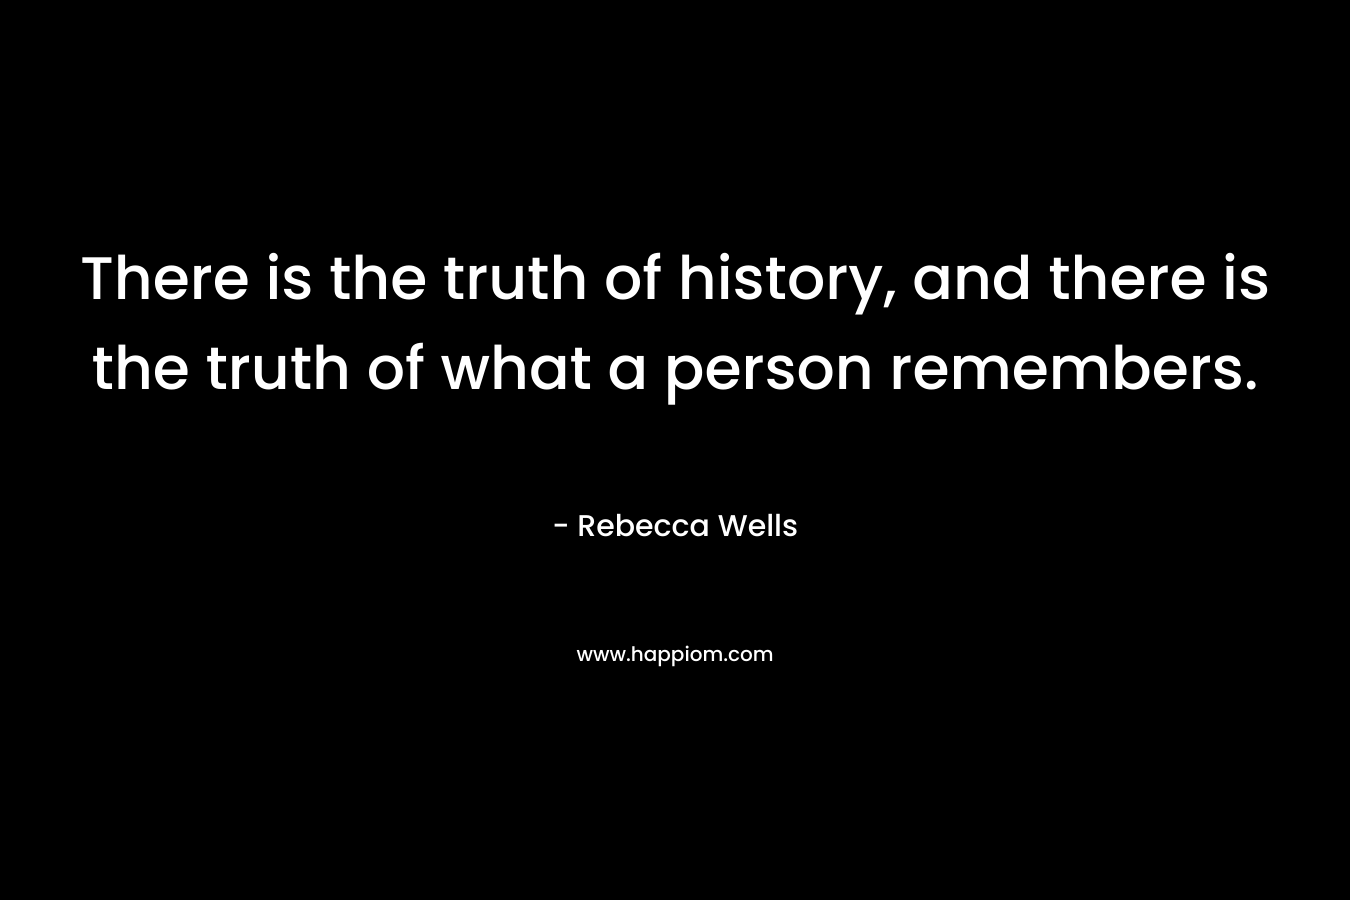 There is the truth of history, and there is the truth of what a person remembers. – Rebecca Wells